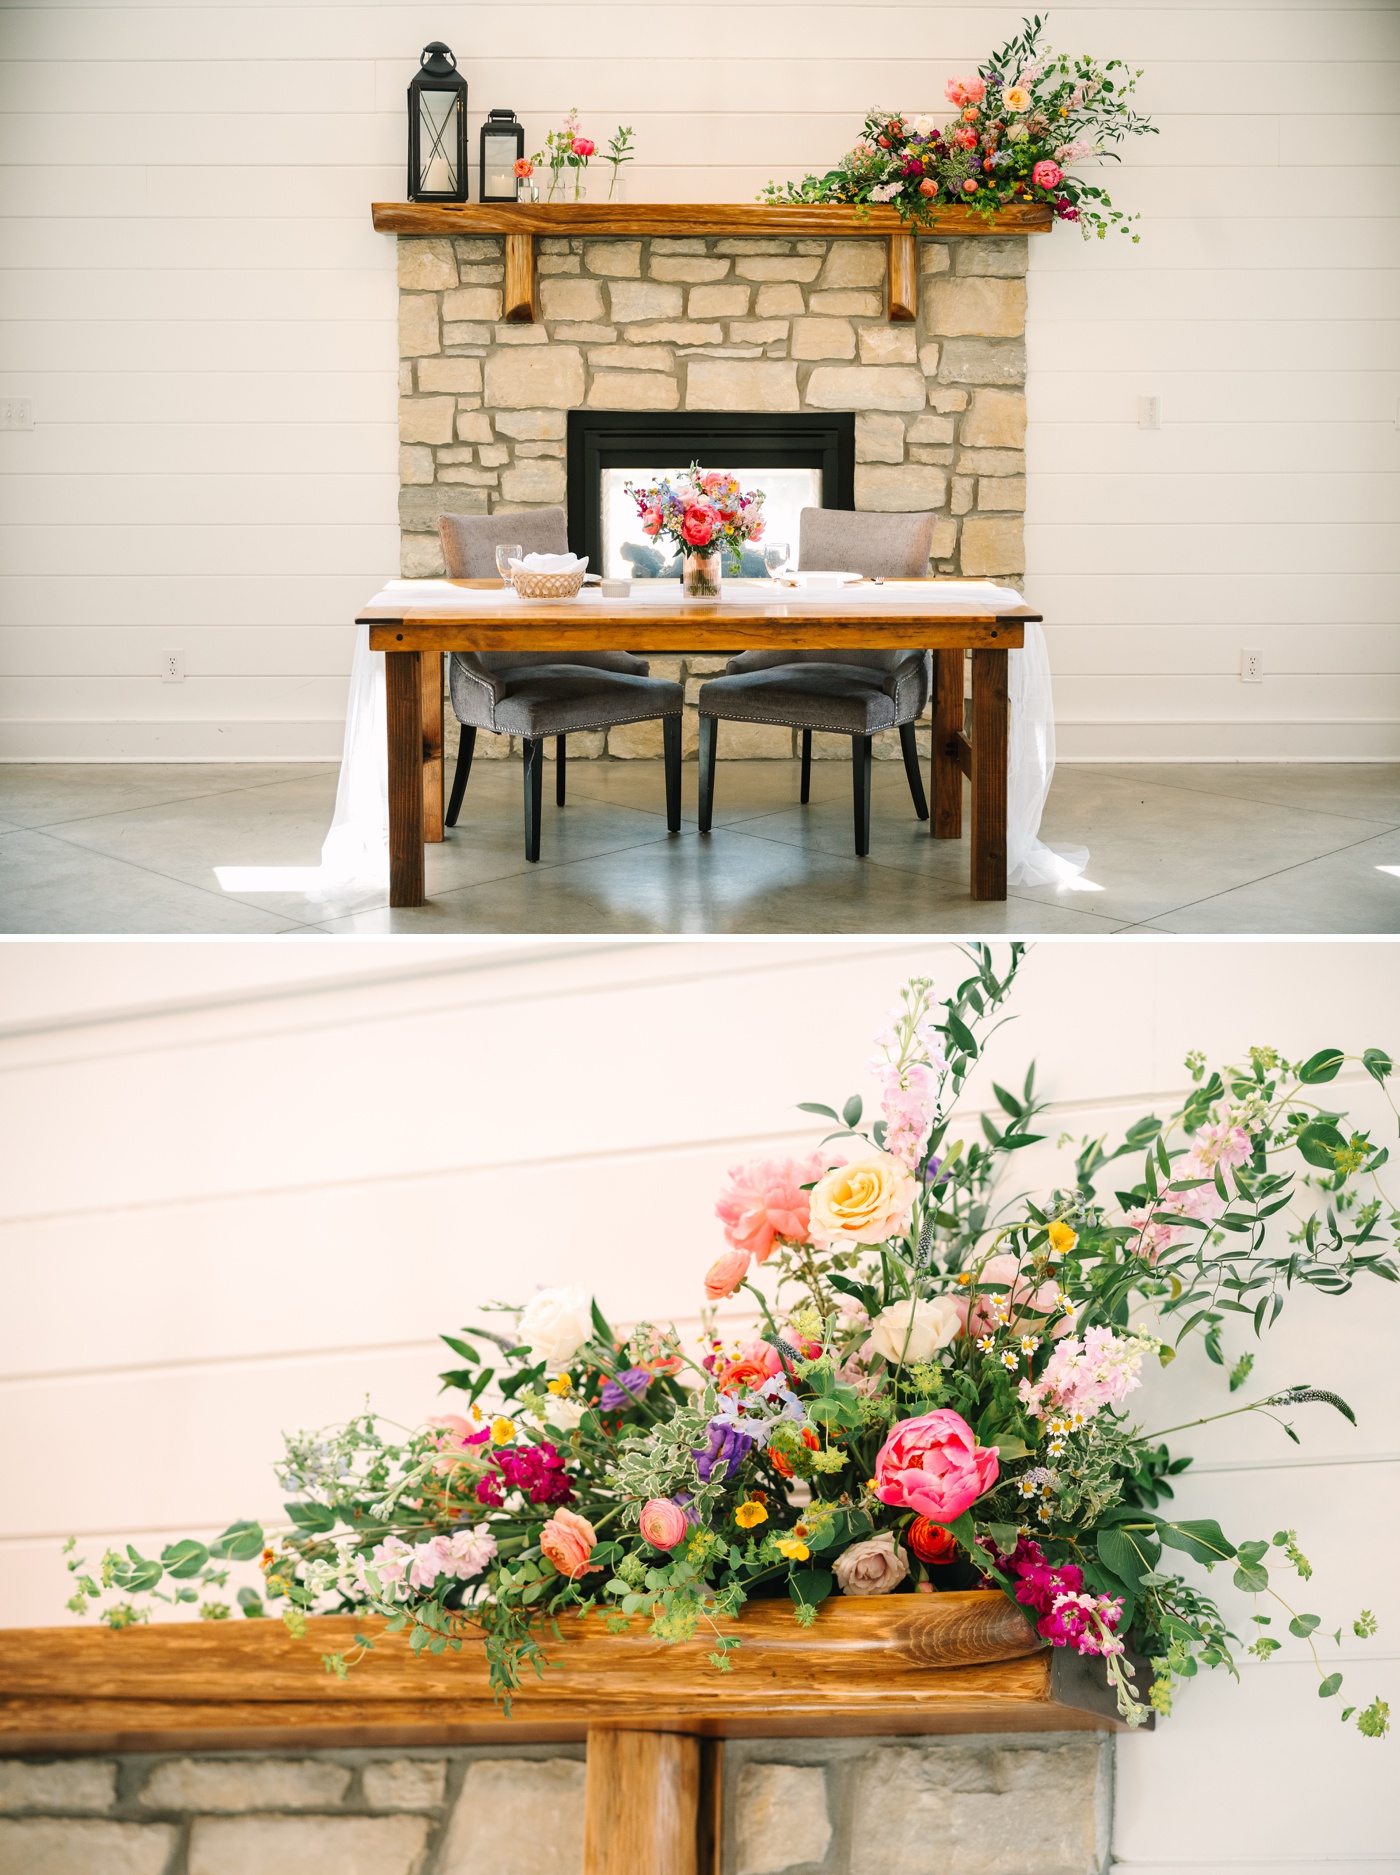 Fireplace mantle wedding floral arrangement with roses, peonies, and feverfew daisies